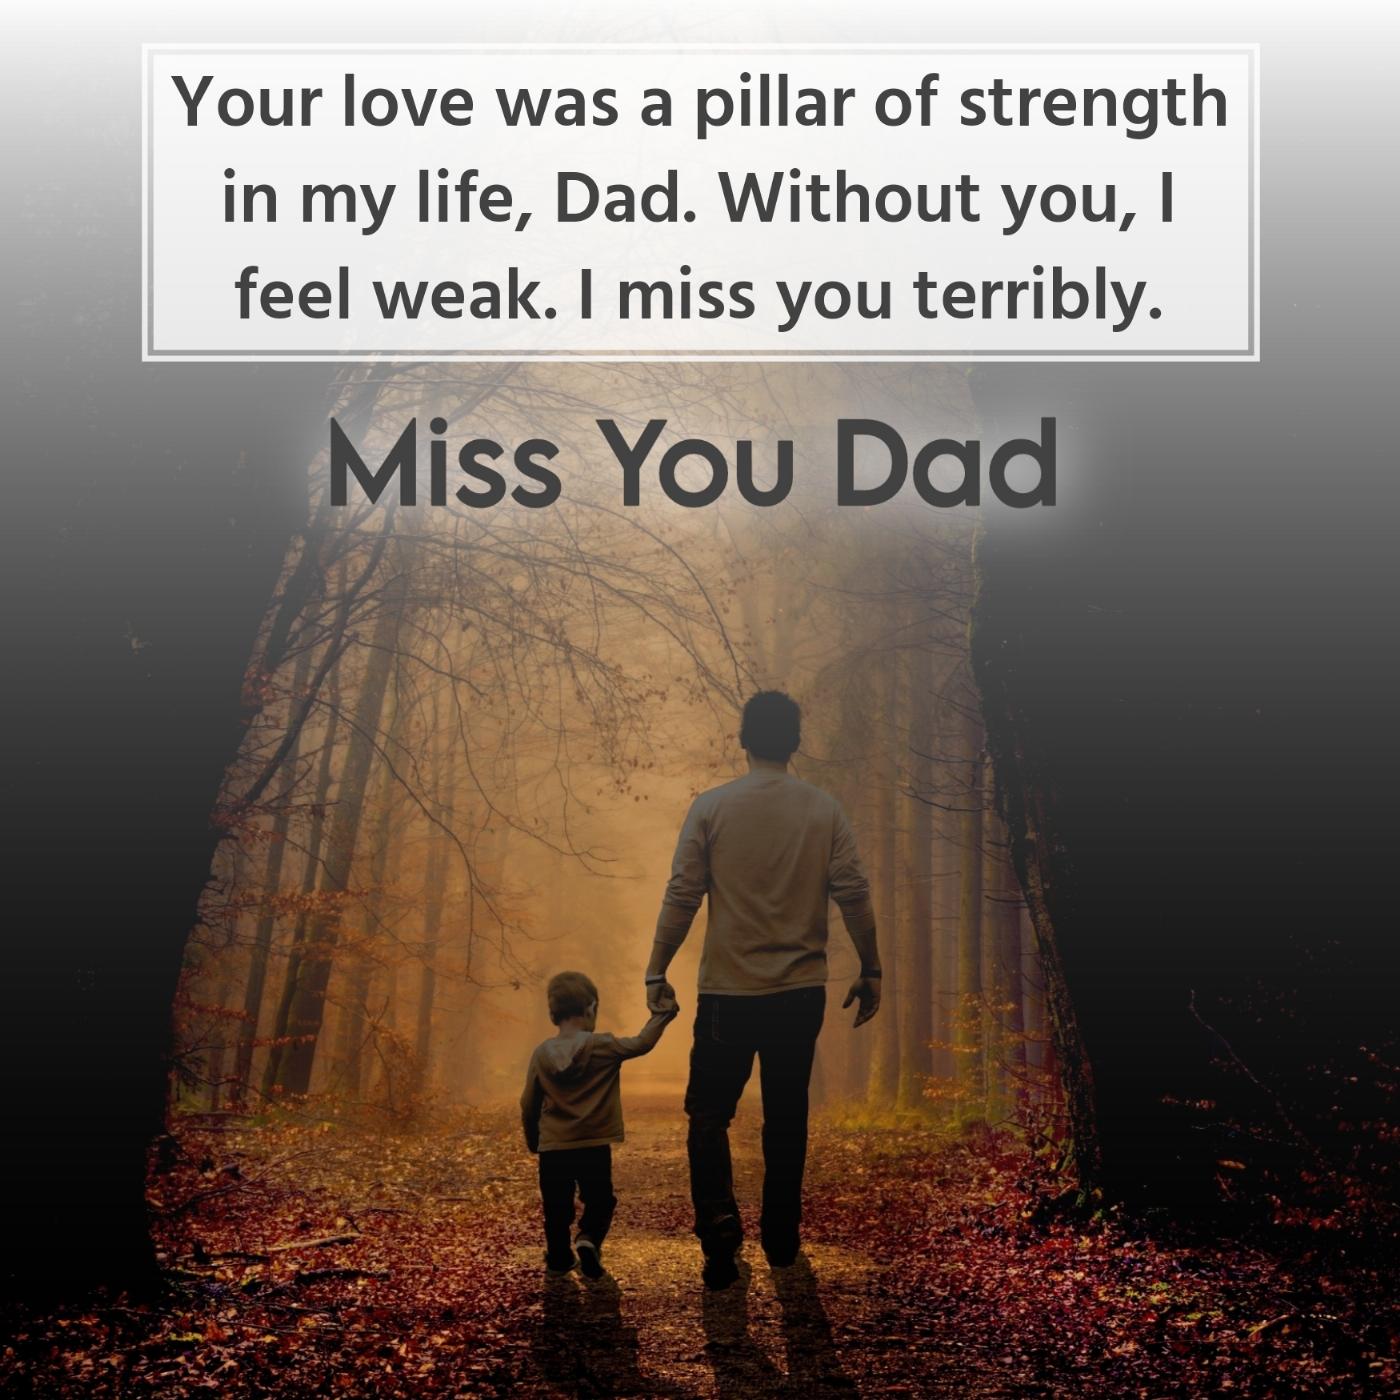 Your love was a pillar of strength in my life Dad